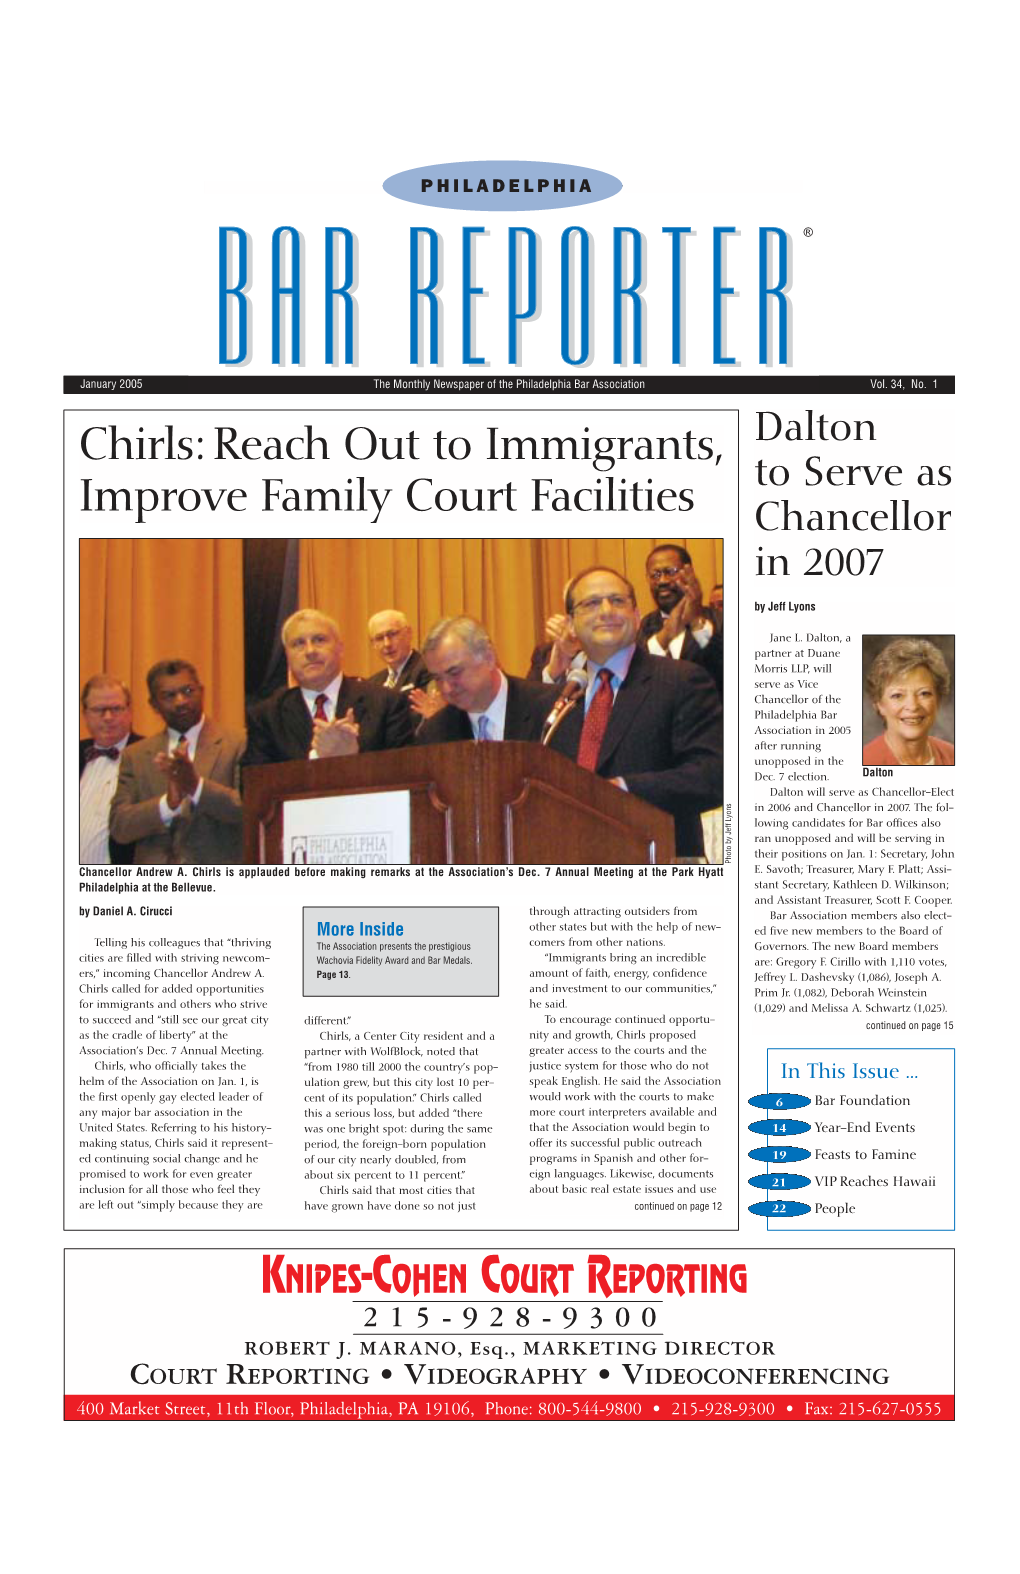 Chirls: Reach out to Immigrants, Improve Family Court Facilities